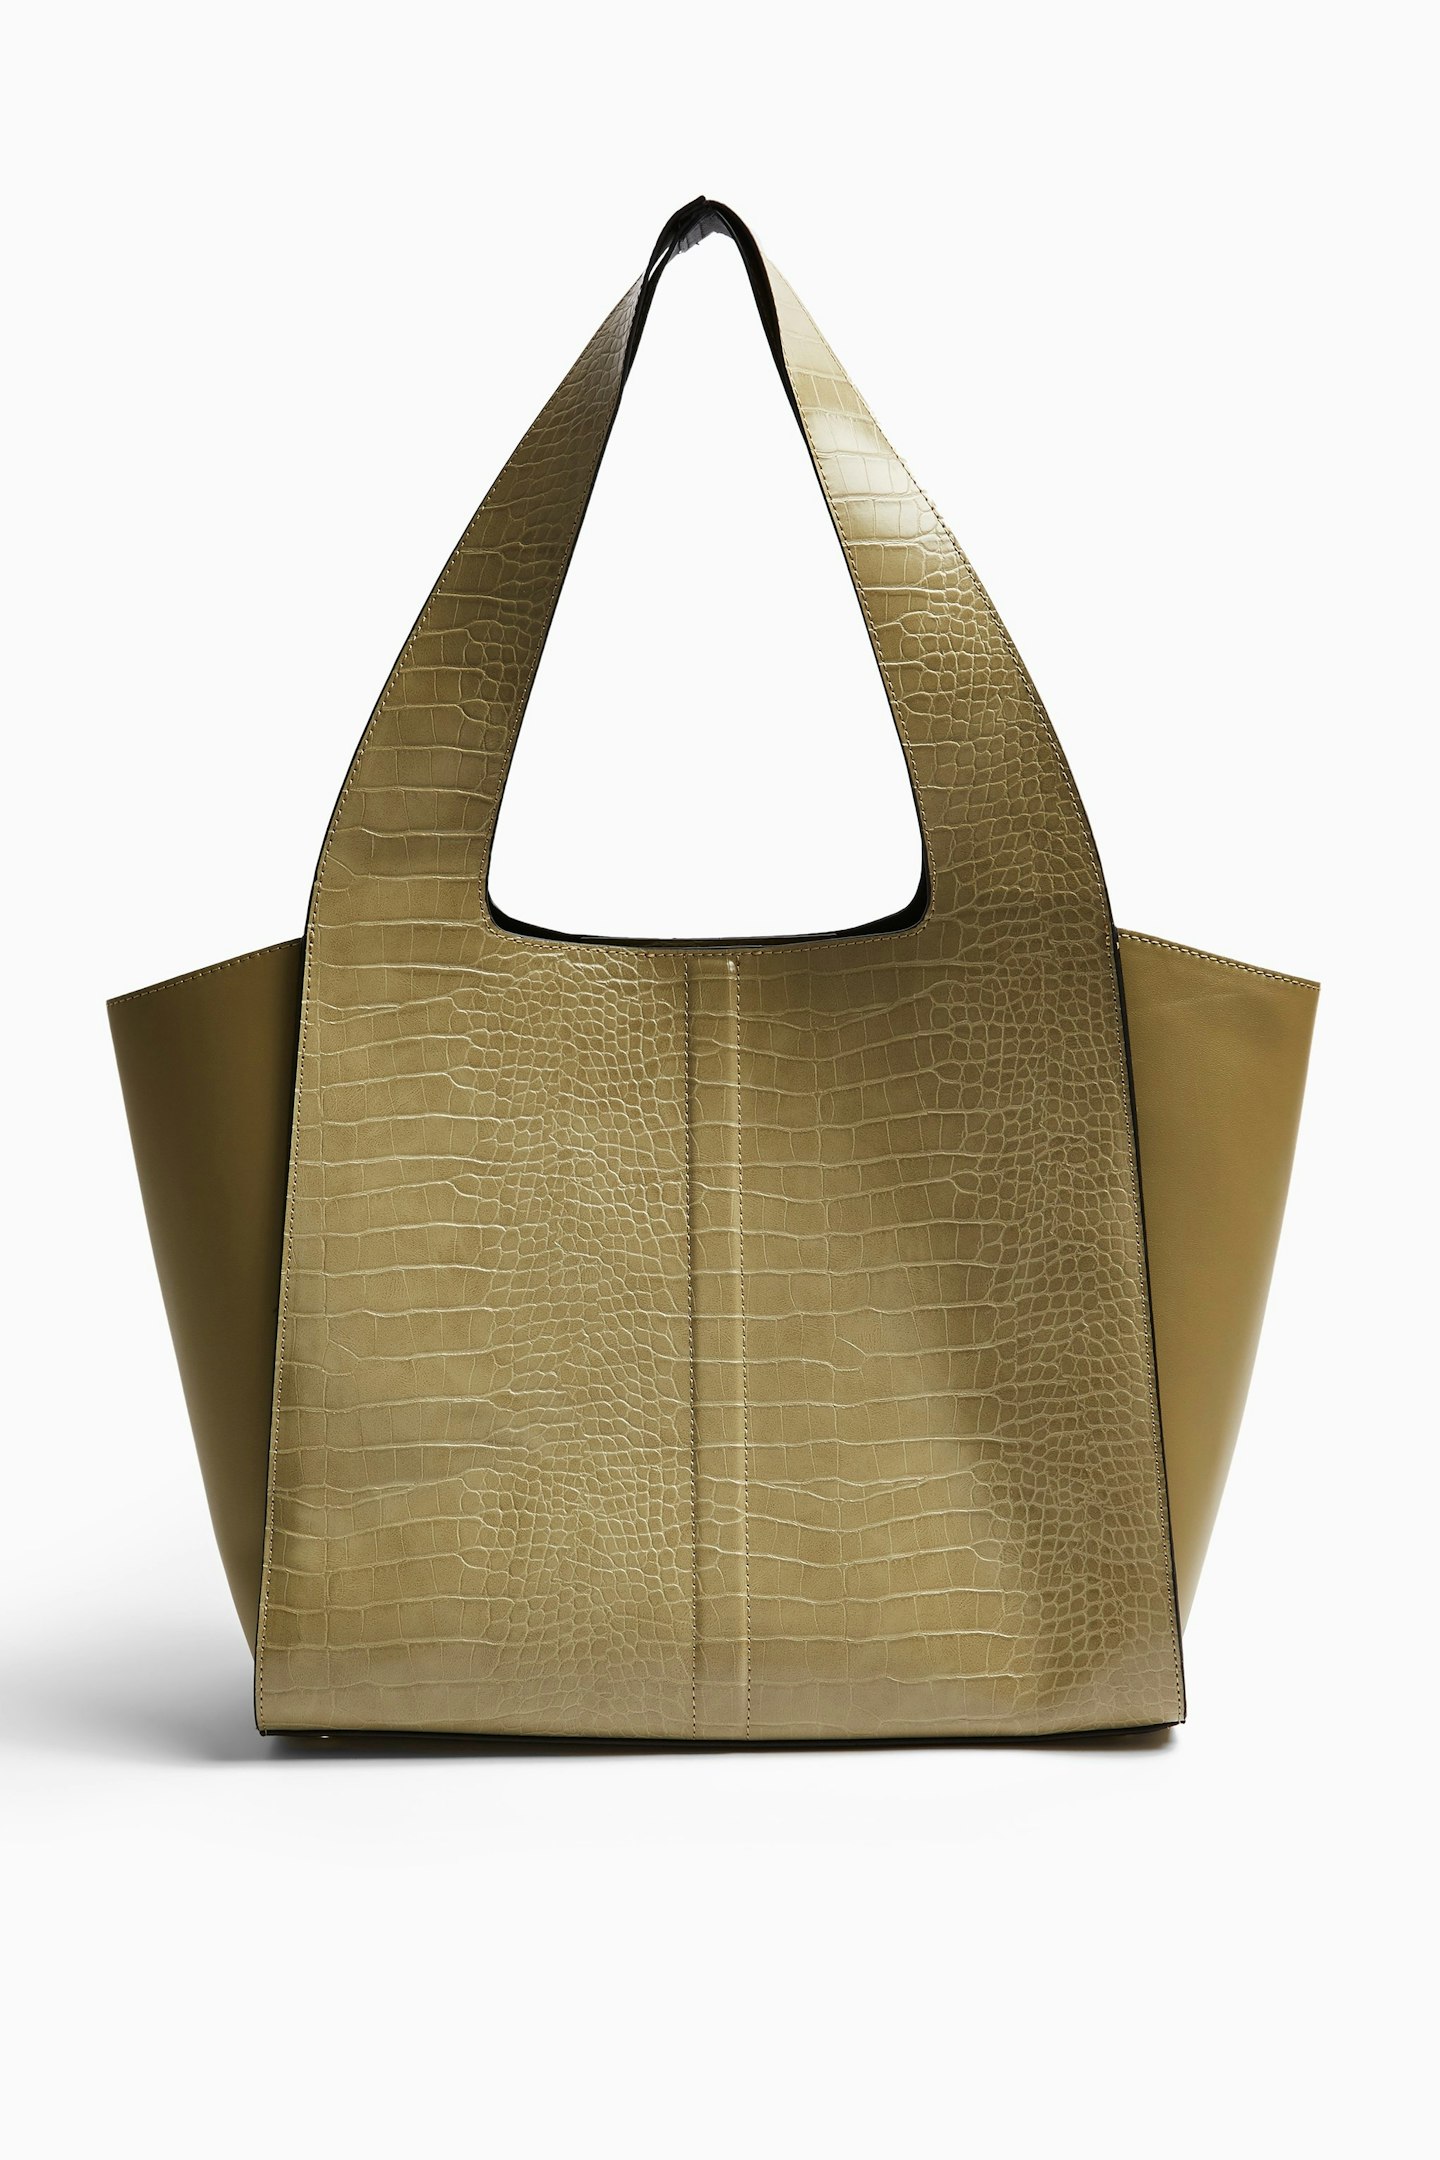 Topshop, Wing Taylor Tote Bag, Was £20, Now £18